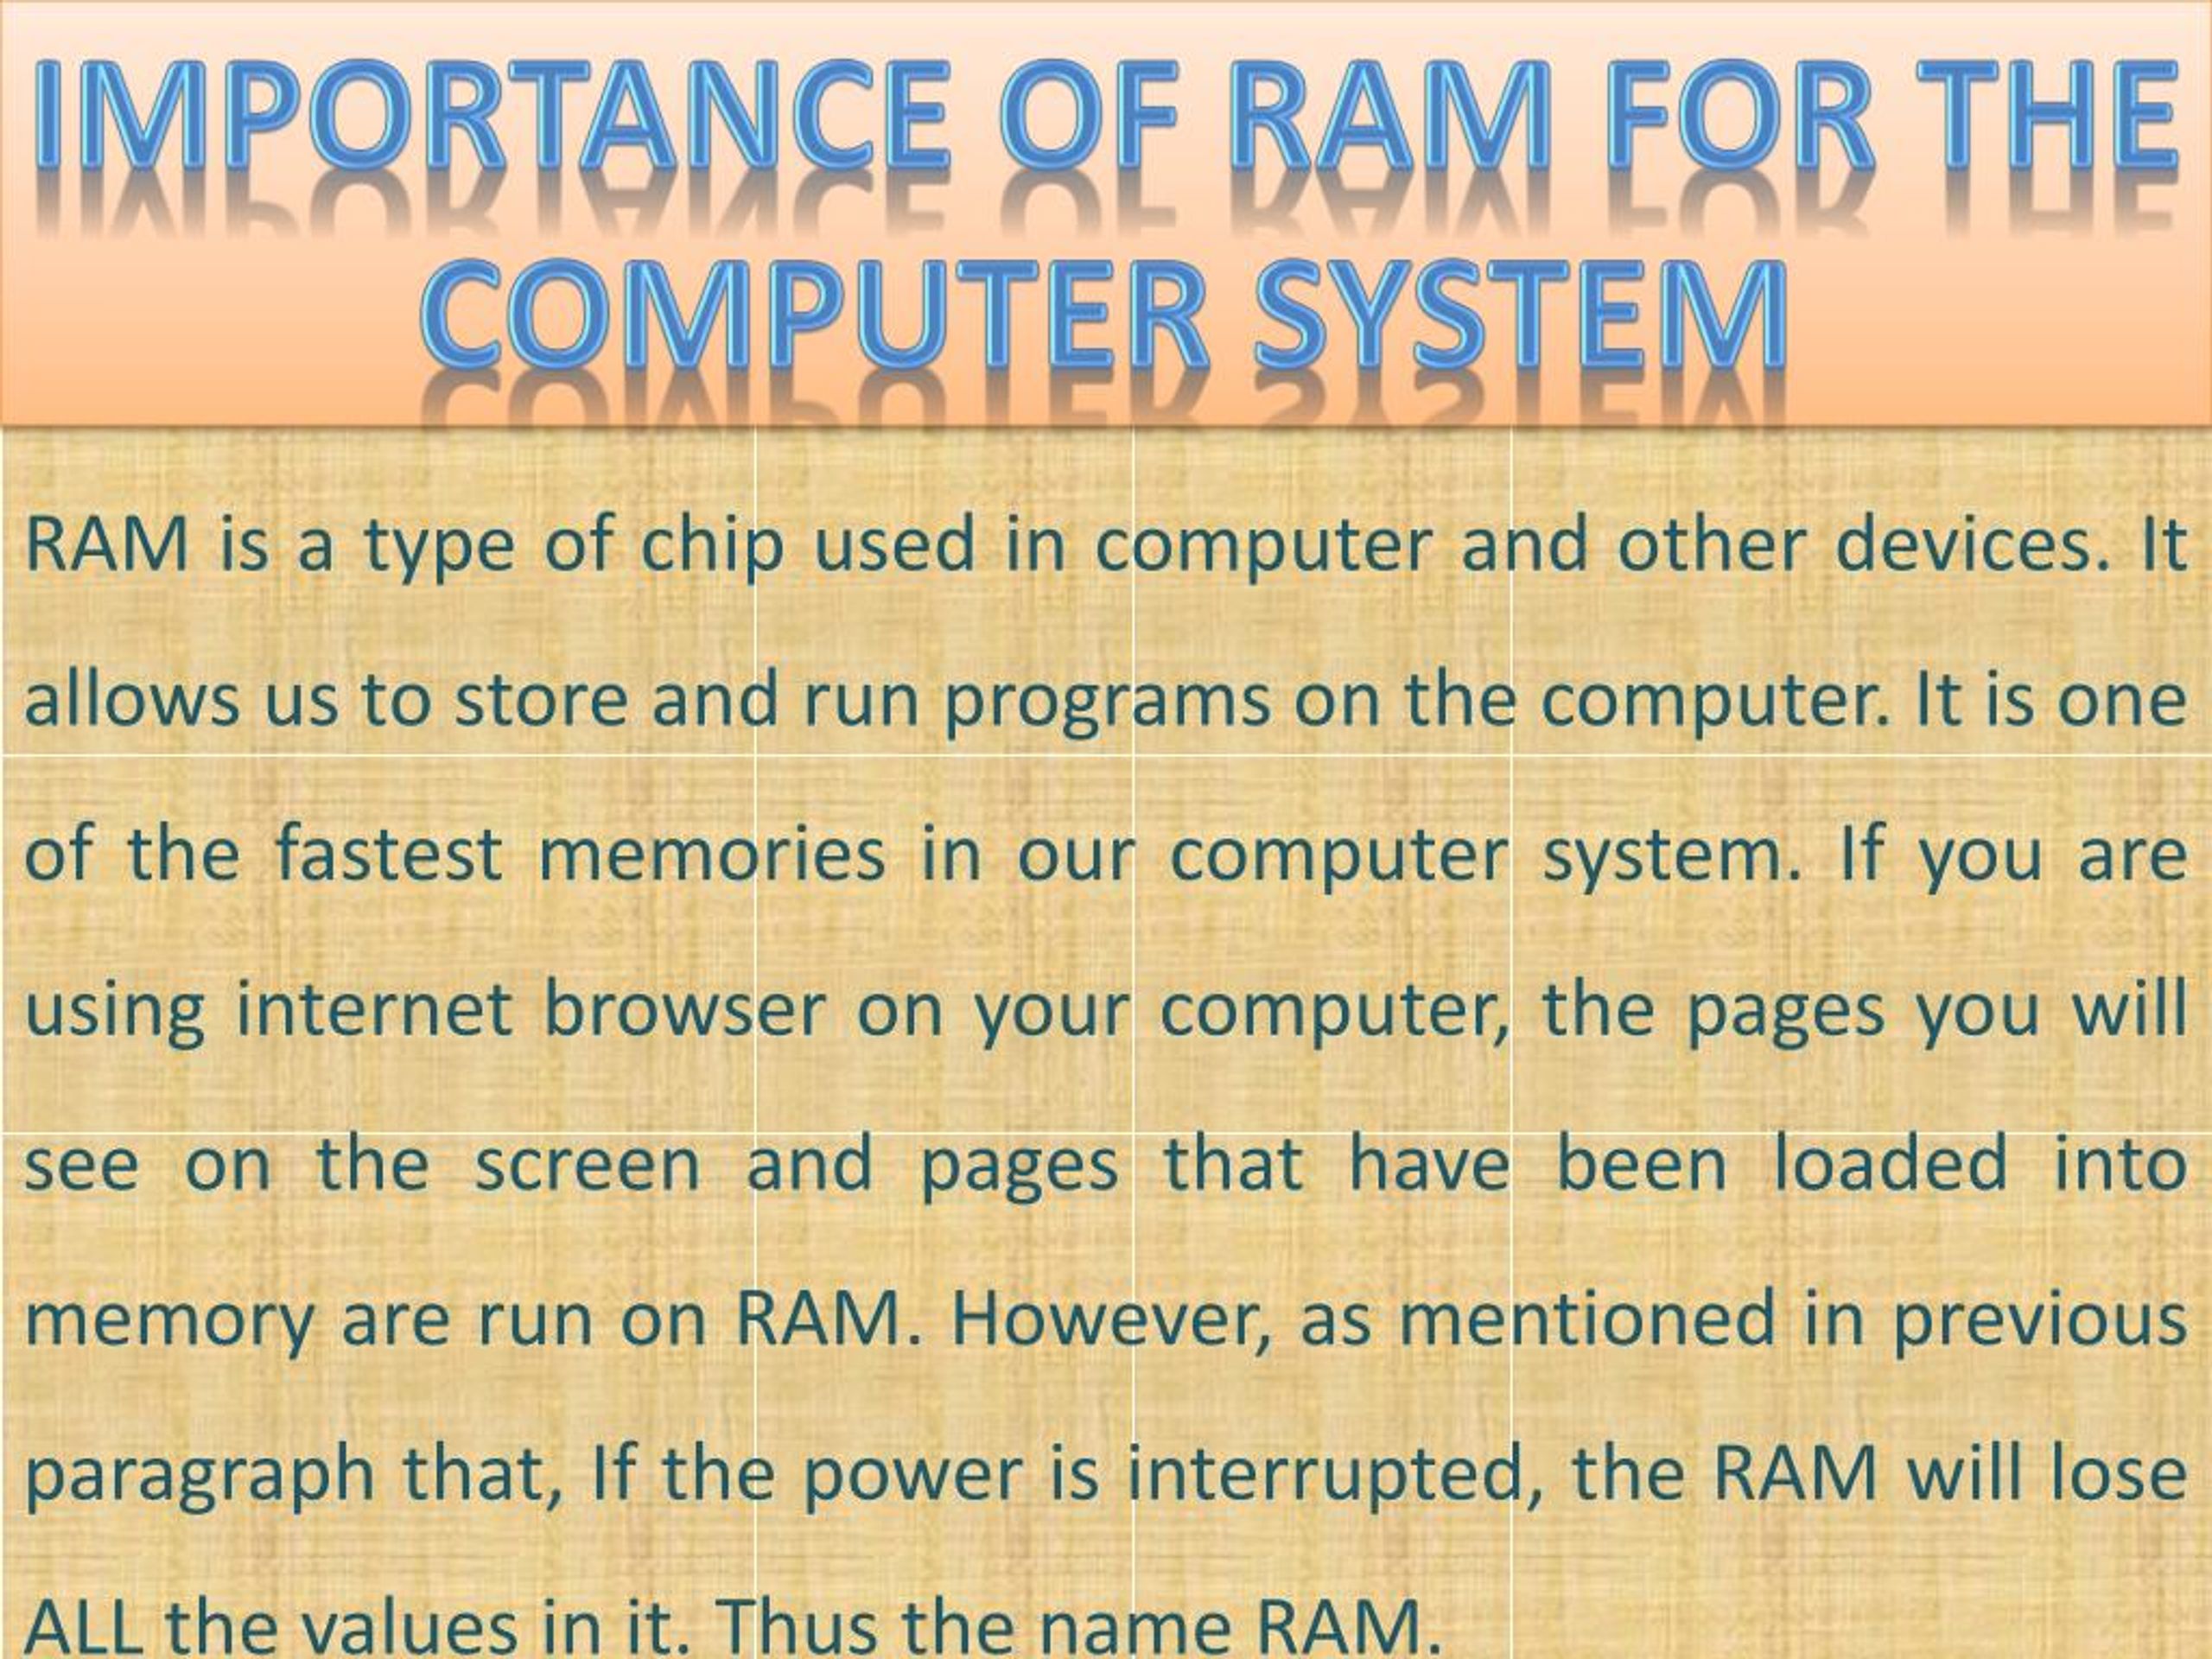 bidragyder springe stamme PPT - Forthworth Technologies - Importance of ram for the computer system  PowerPoint Presentation - ID:7199444